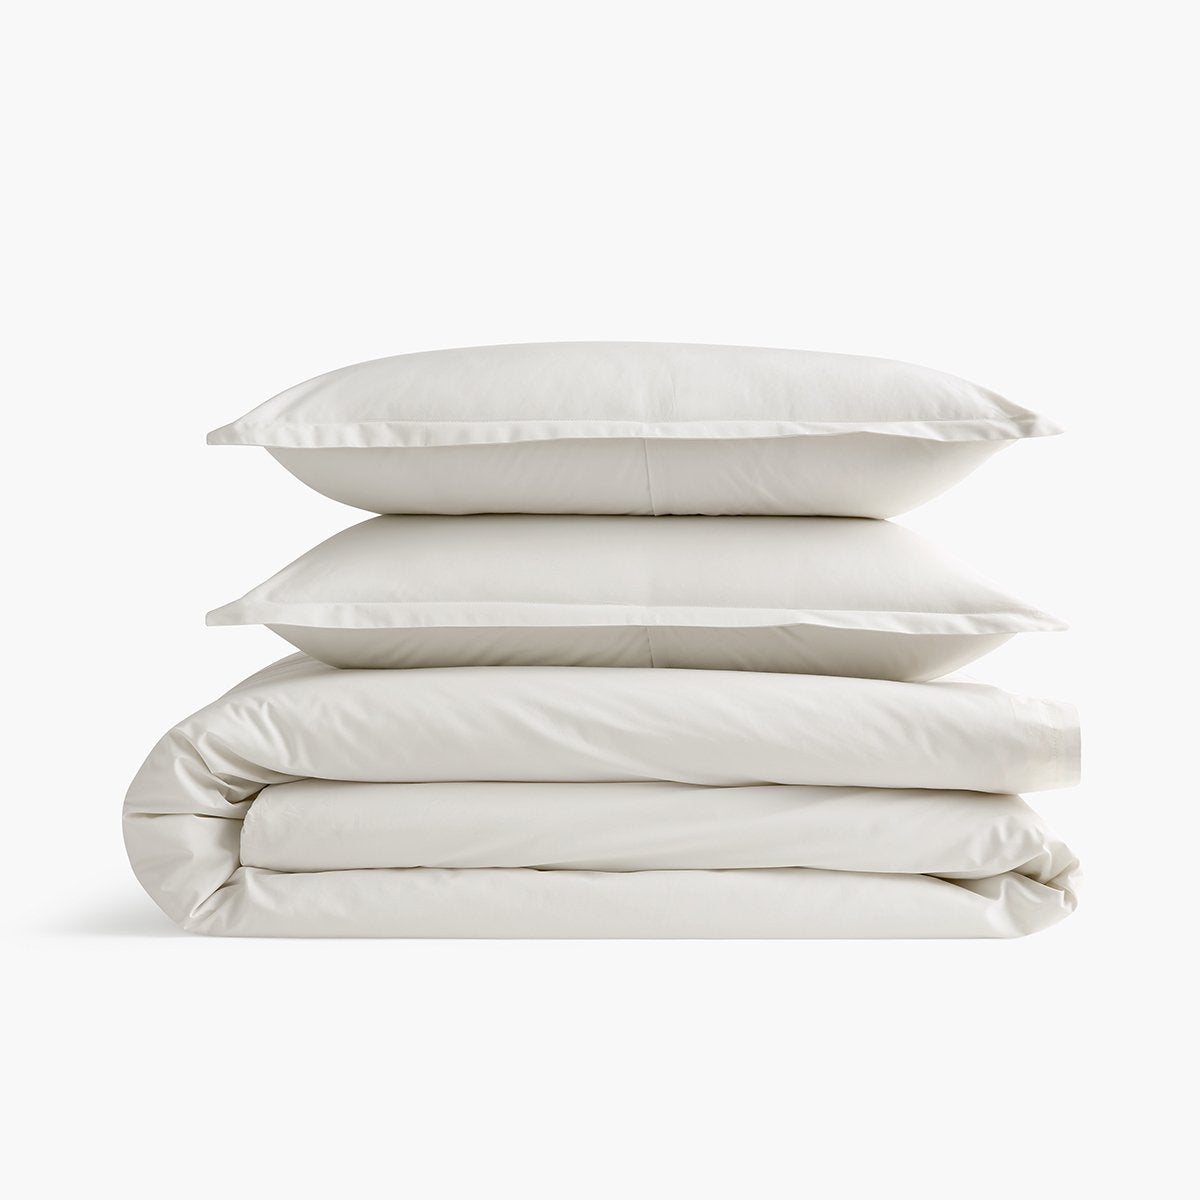 Under The Canopy Organic Percale Sheet Set - White White / Full Bed